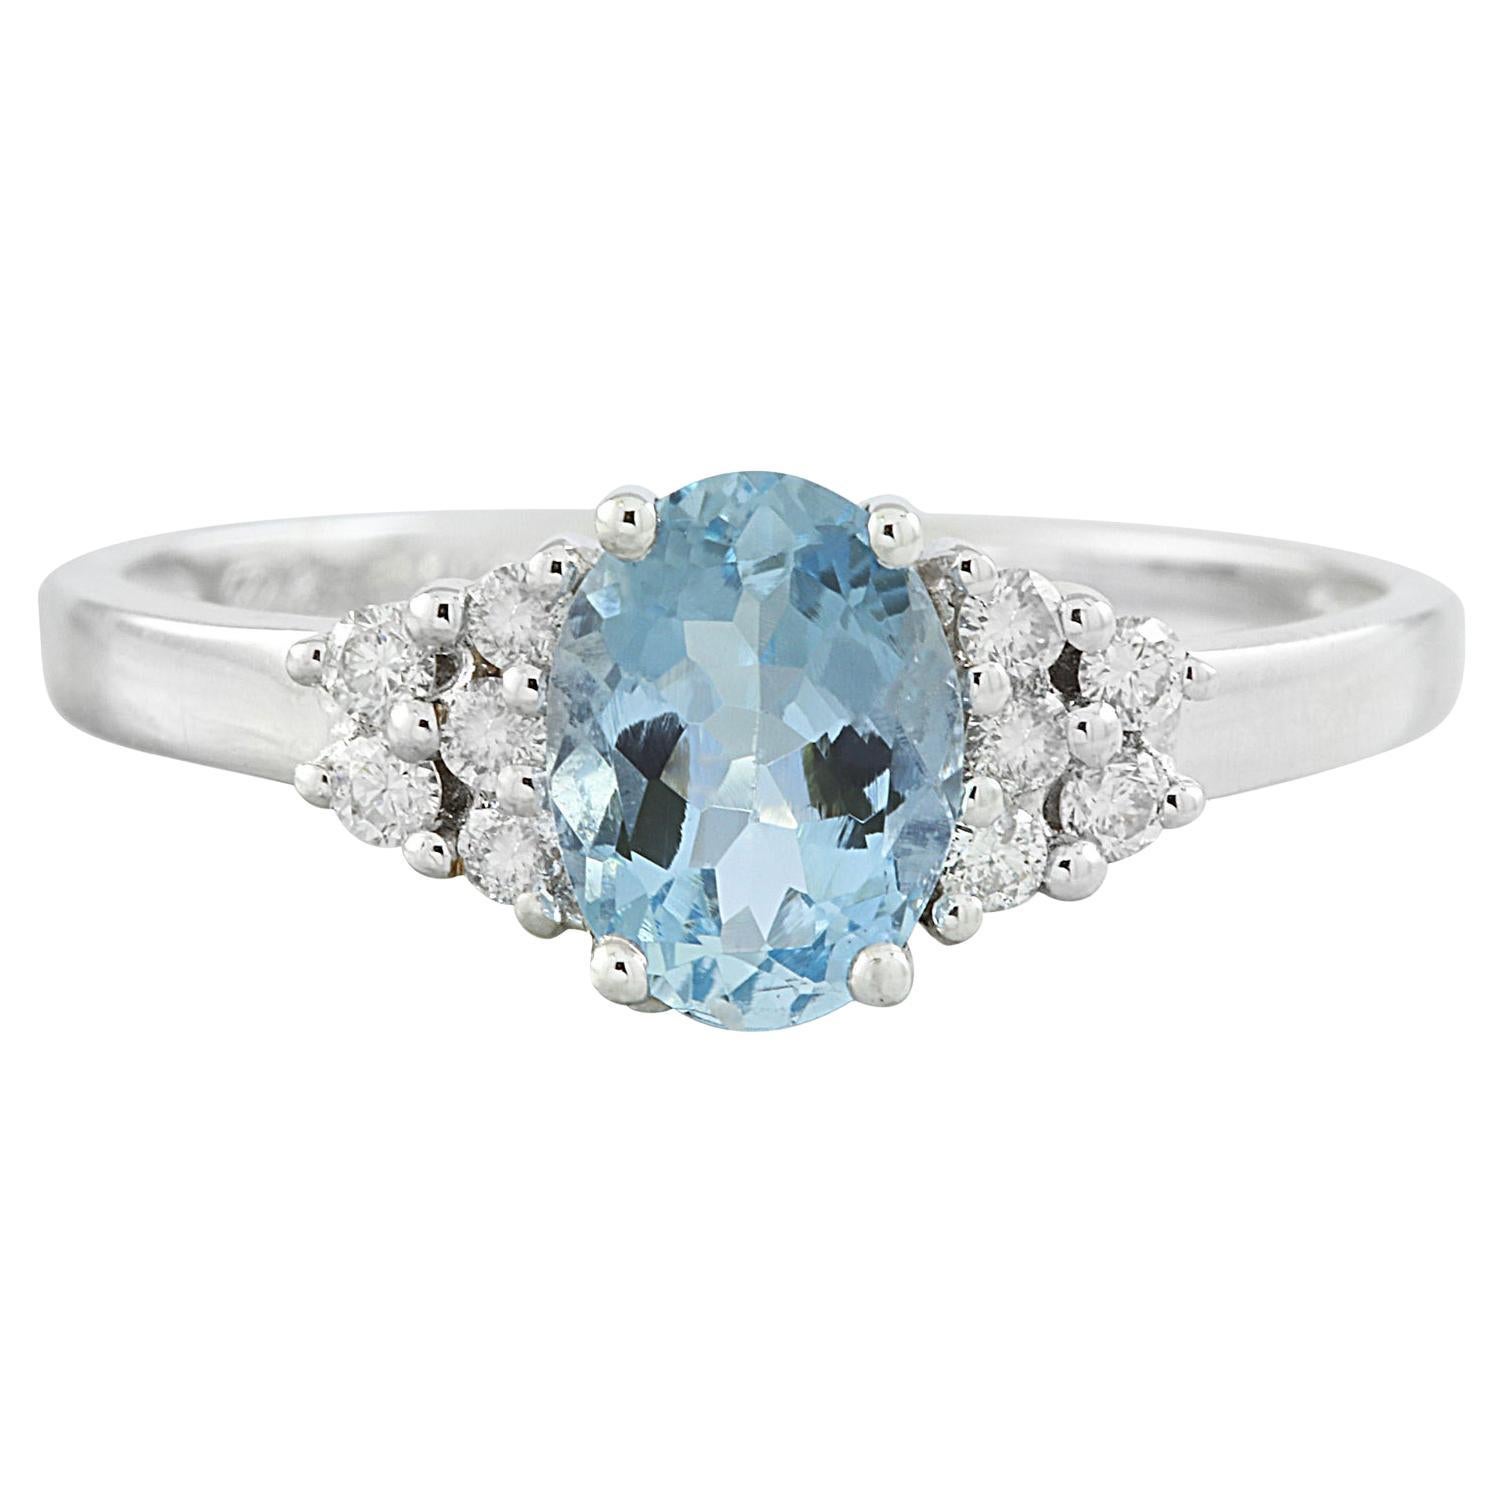 Exquisite Natural Sky Blue Topaz Diamond Ring in 14K Solid White Gold